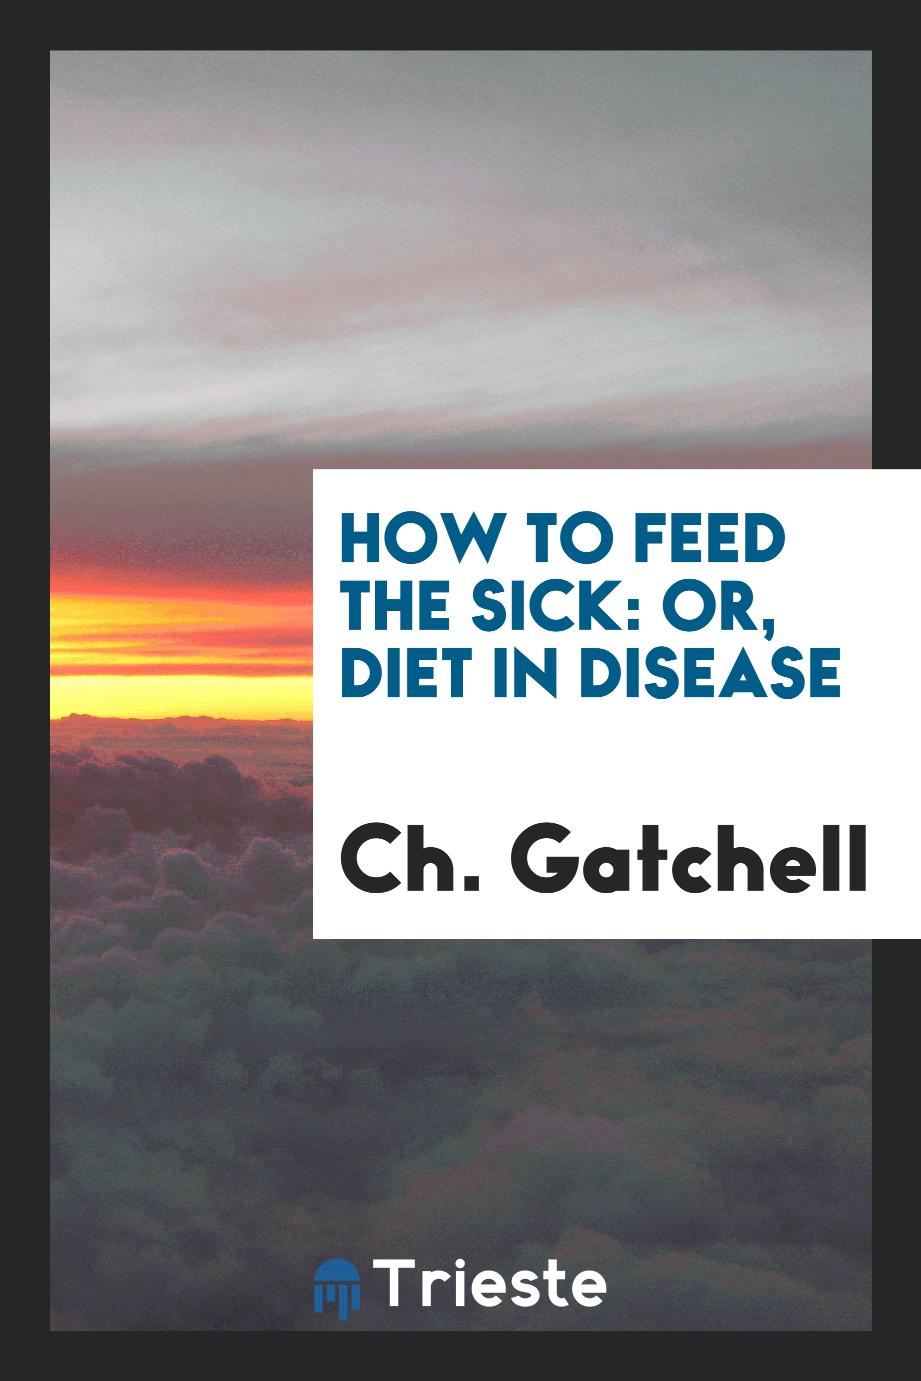 How to Feed the Sick: Or, Diet in Disease